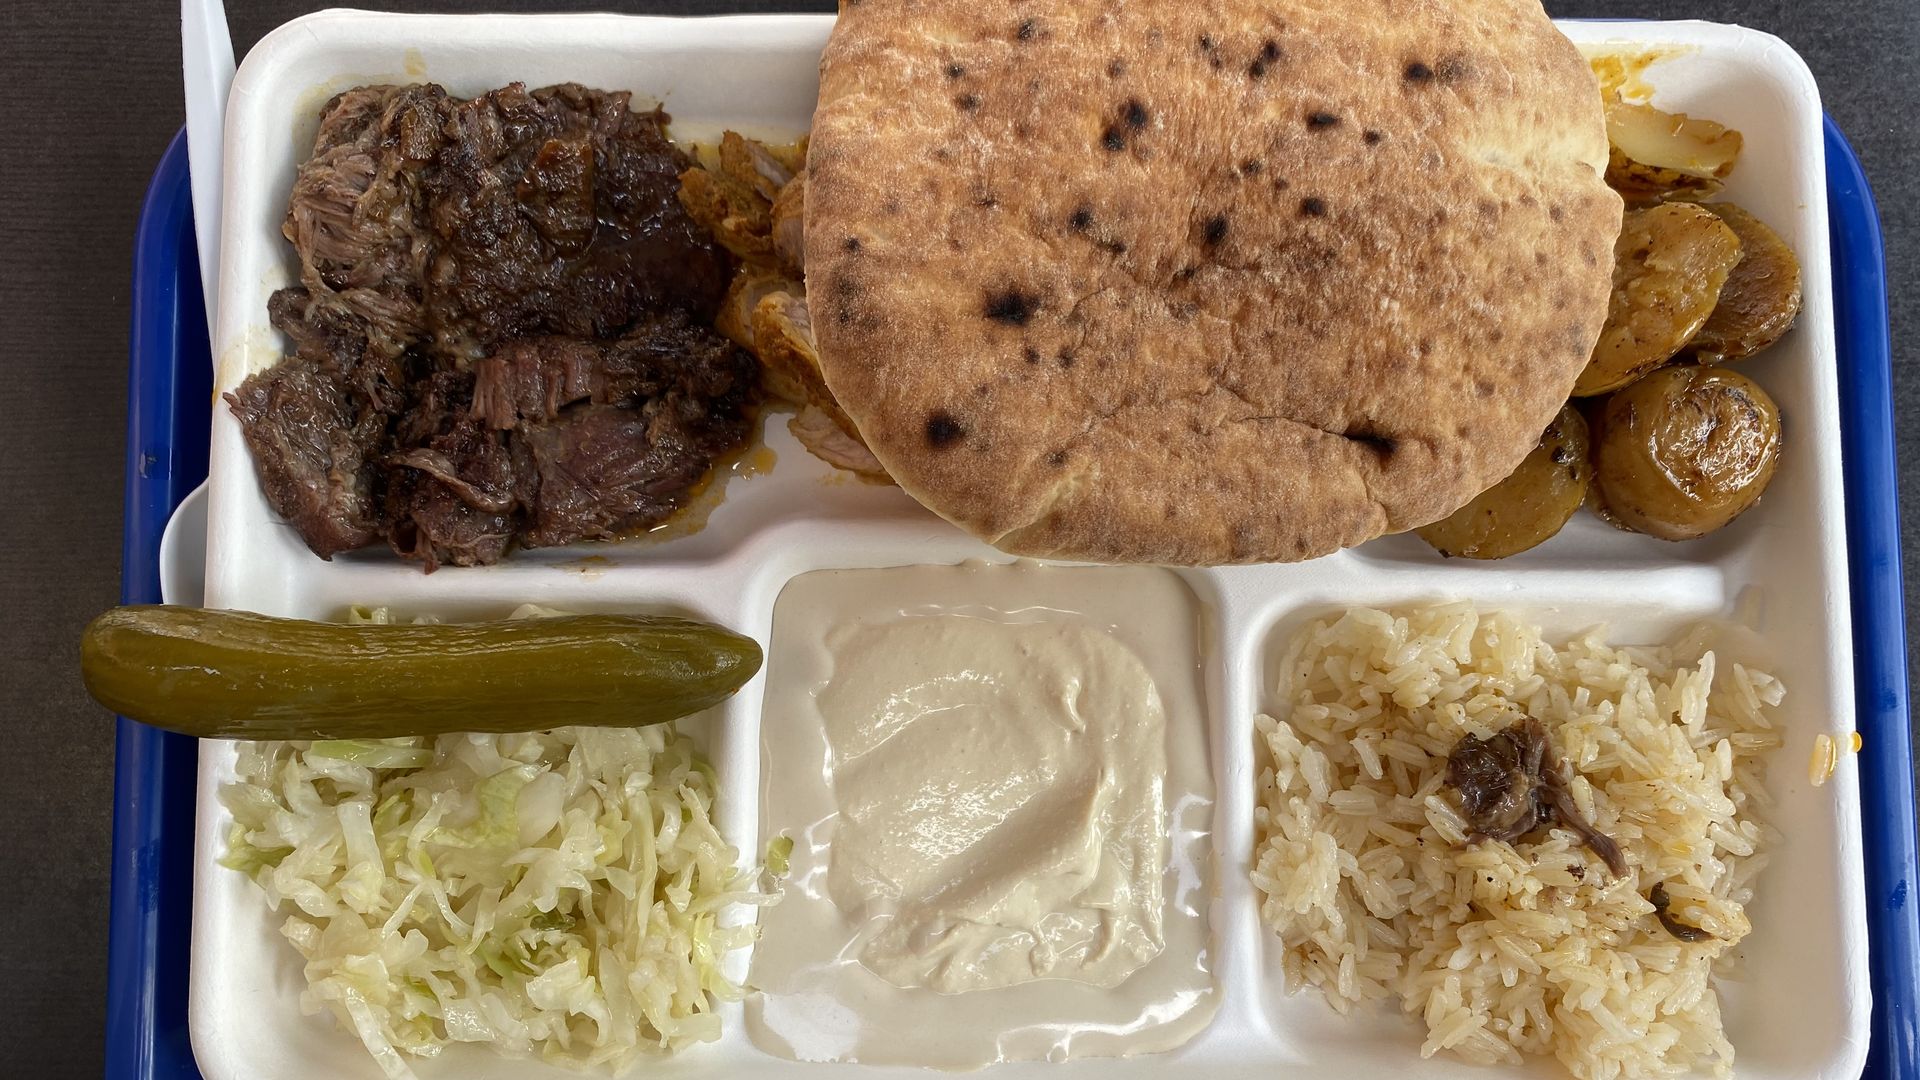 A compartmentalized tray filled with beef, chicken, potatoes, rice, shredded cabbage, tahini, a pickle and a pita